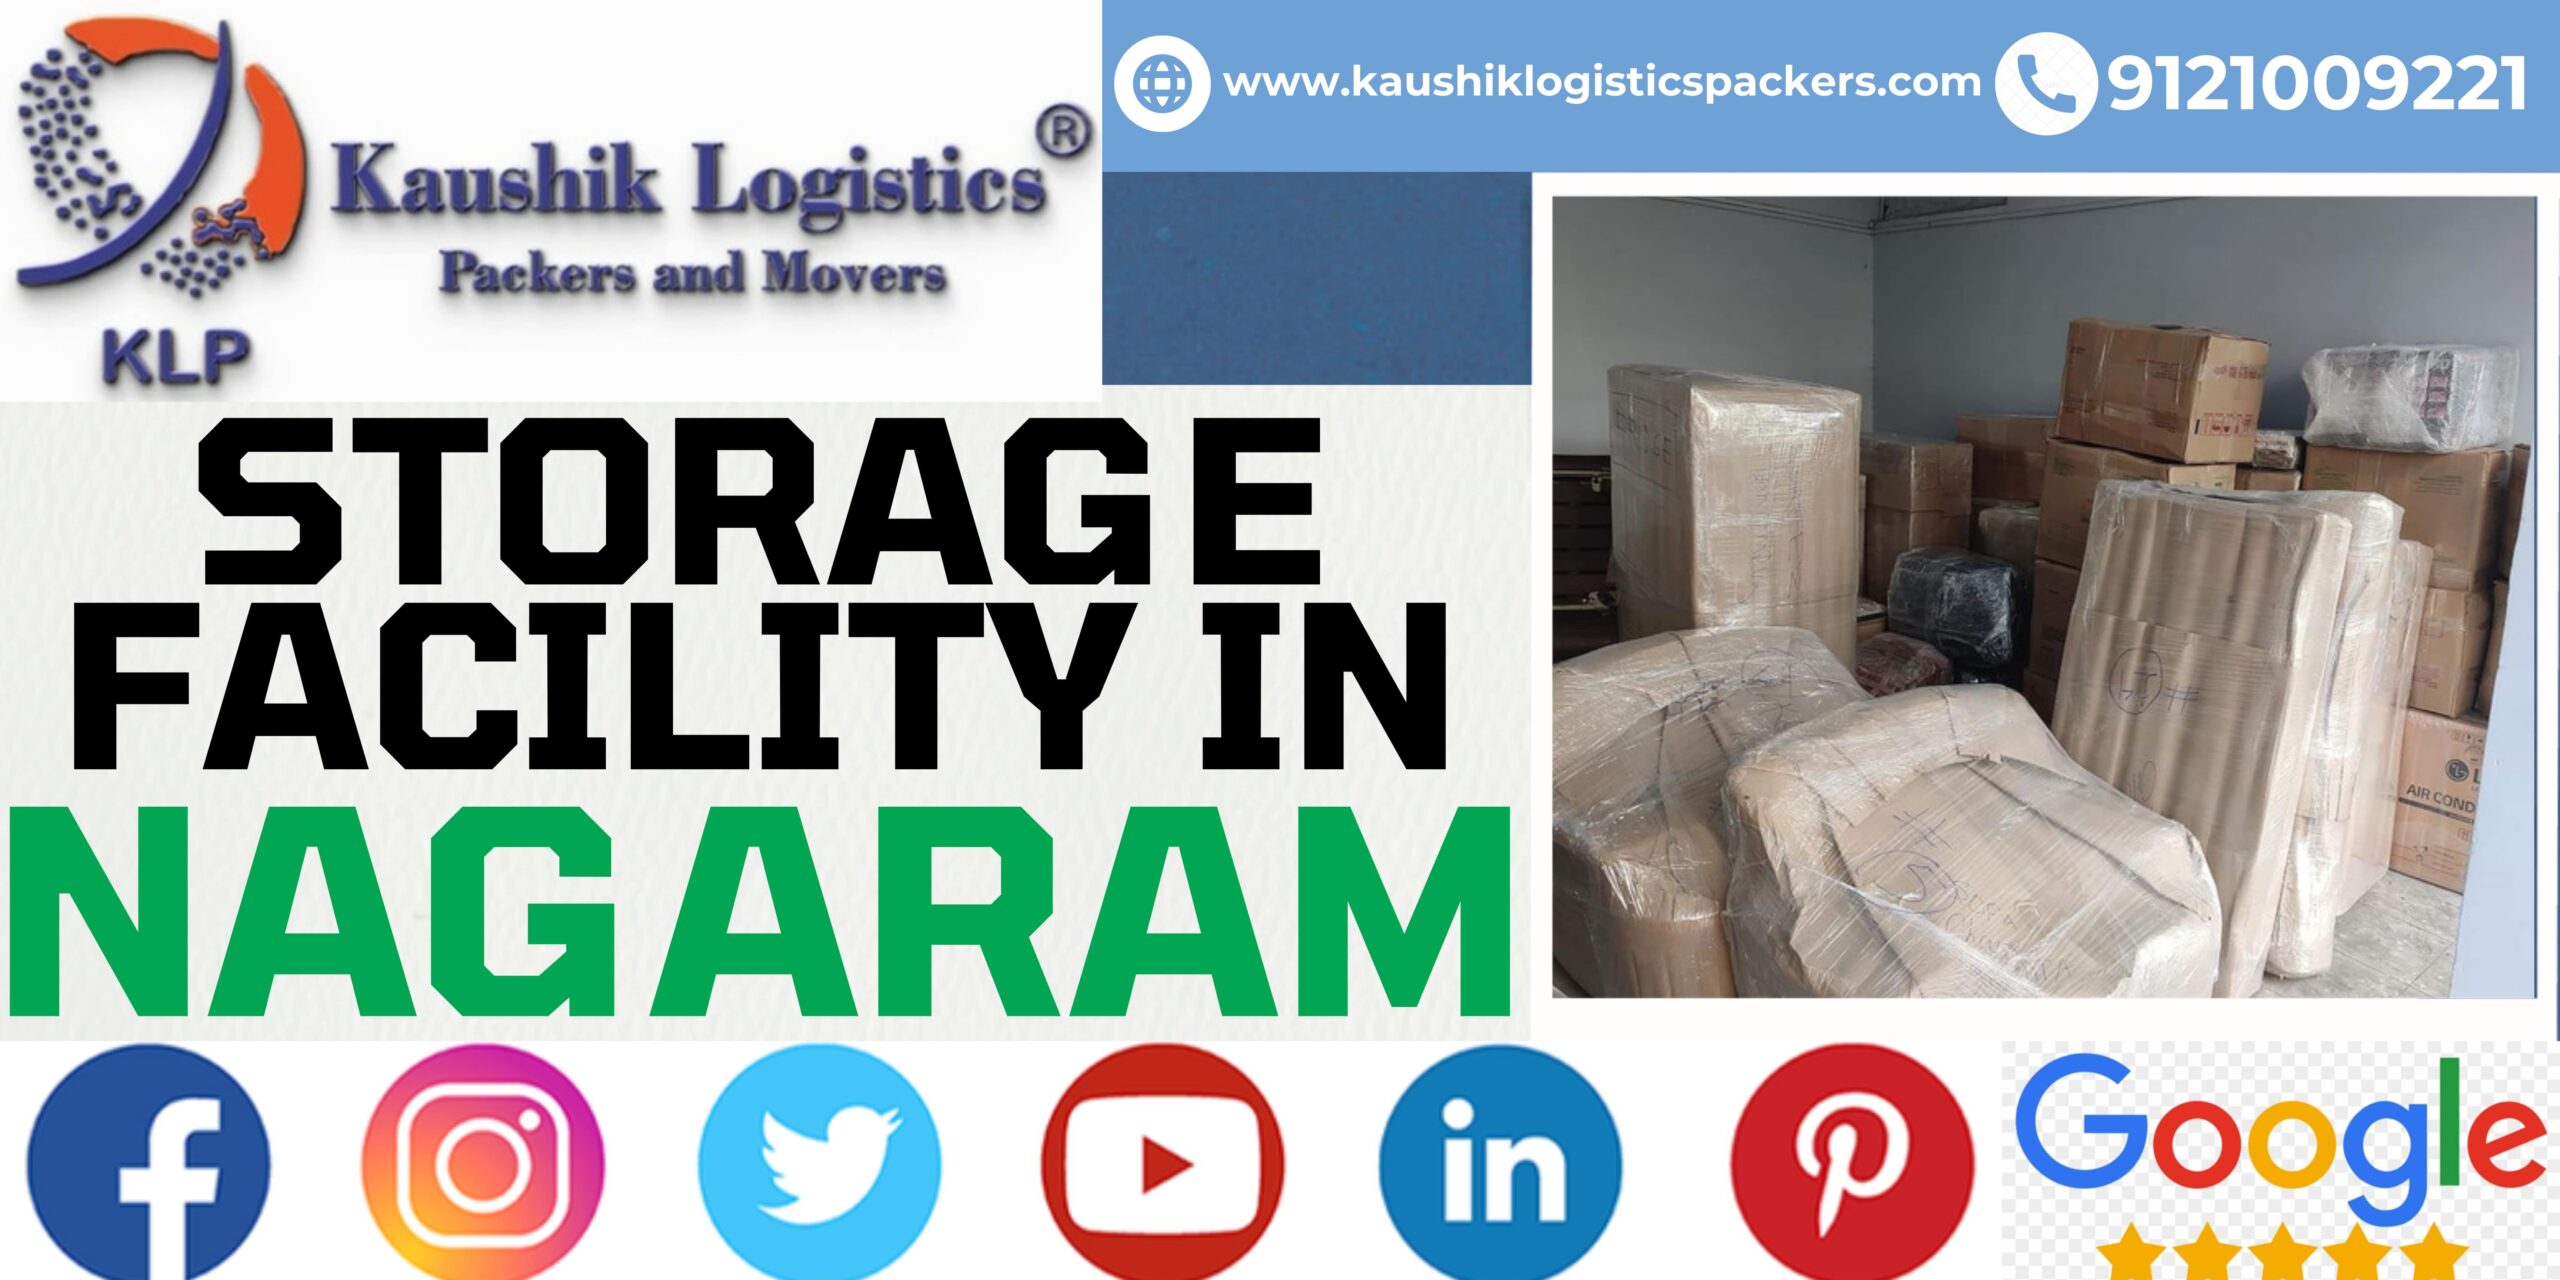 Packers and Movers In Nagaram